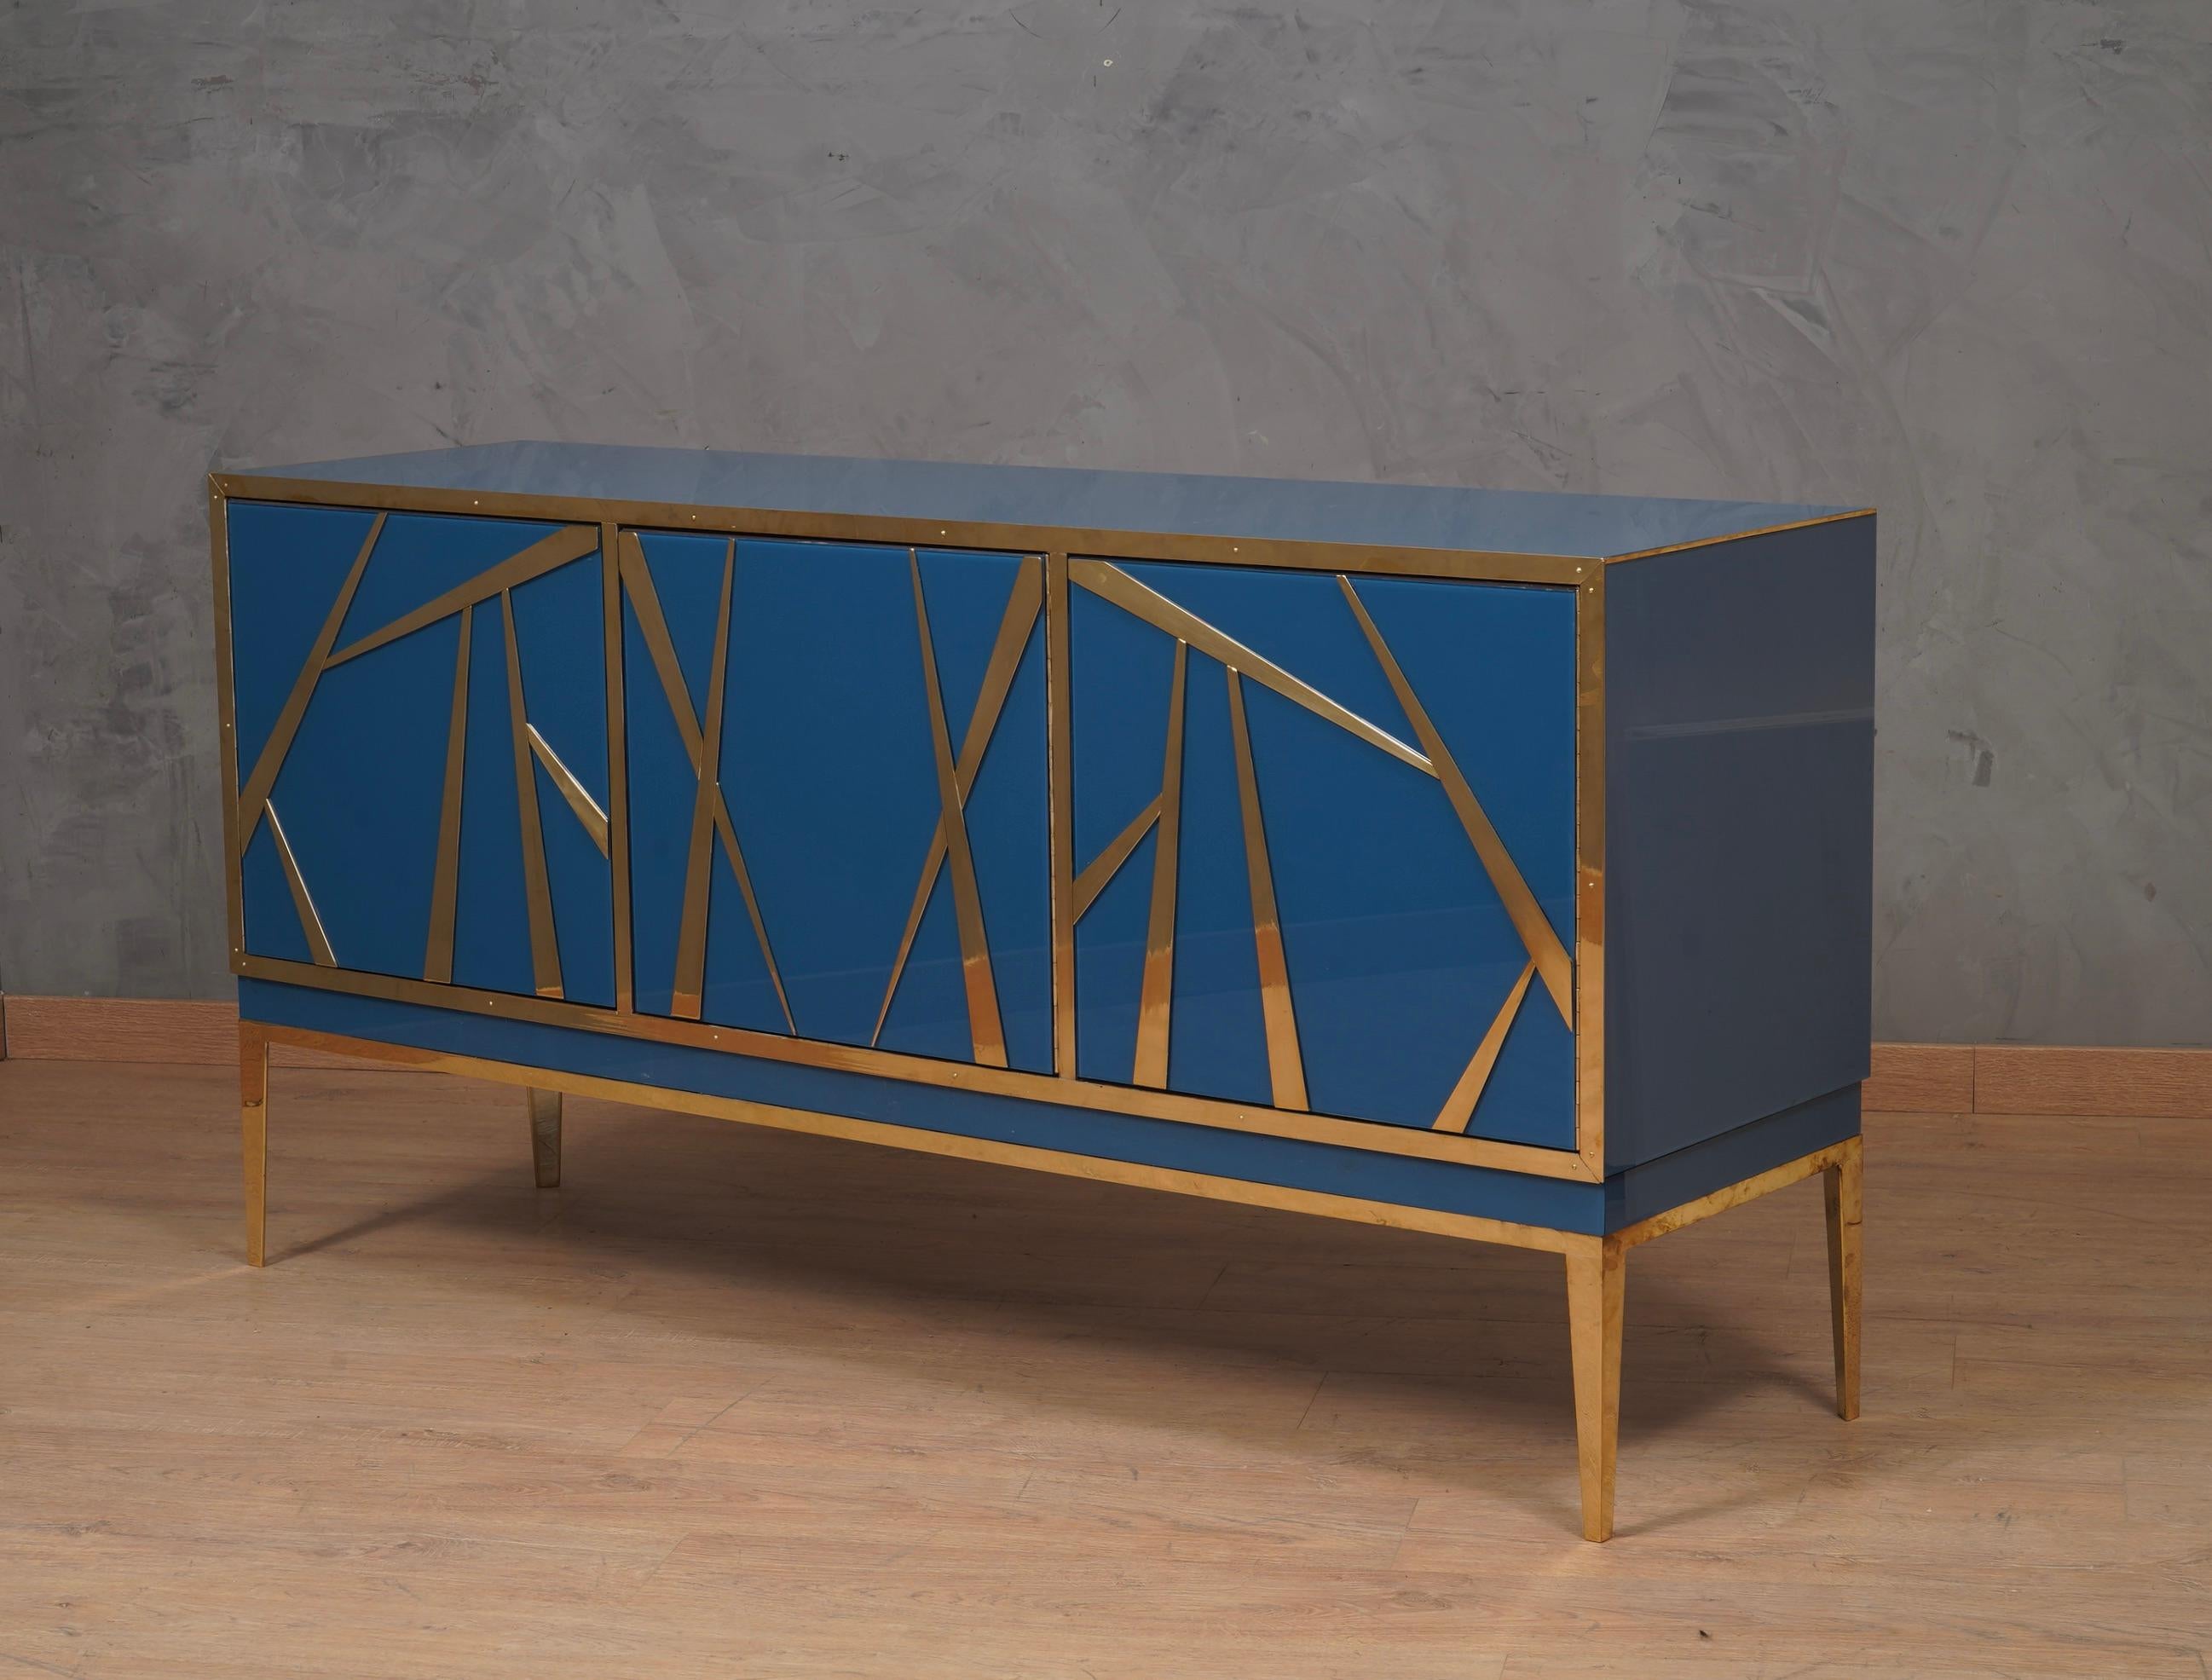 A one-of-a-kind sideboard for its originality and choice of materials. Simple but refined design. Note the rich design of the doors, with smooth colored glass interspersed with brass mouldings.

The sideboard has a wooden structure, which was then